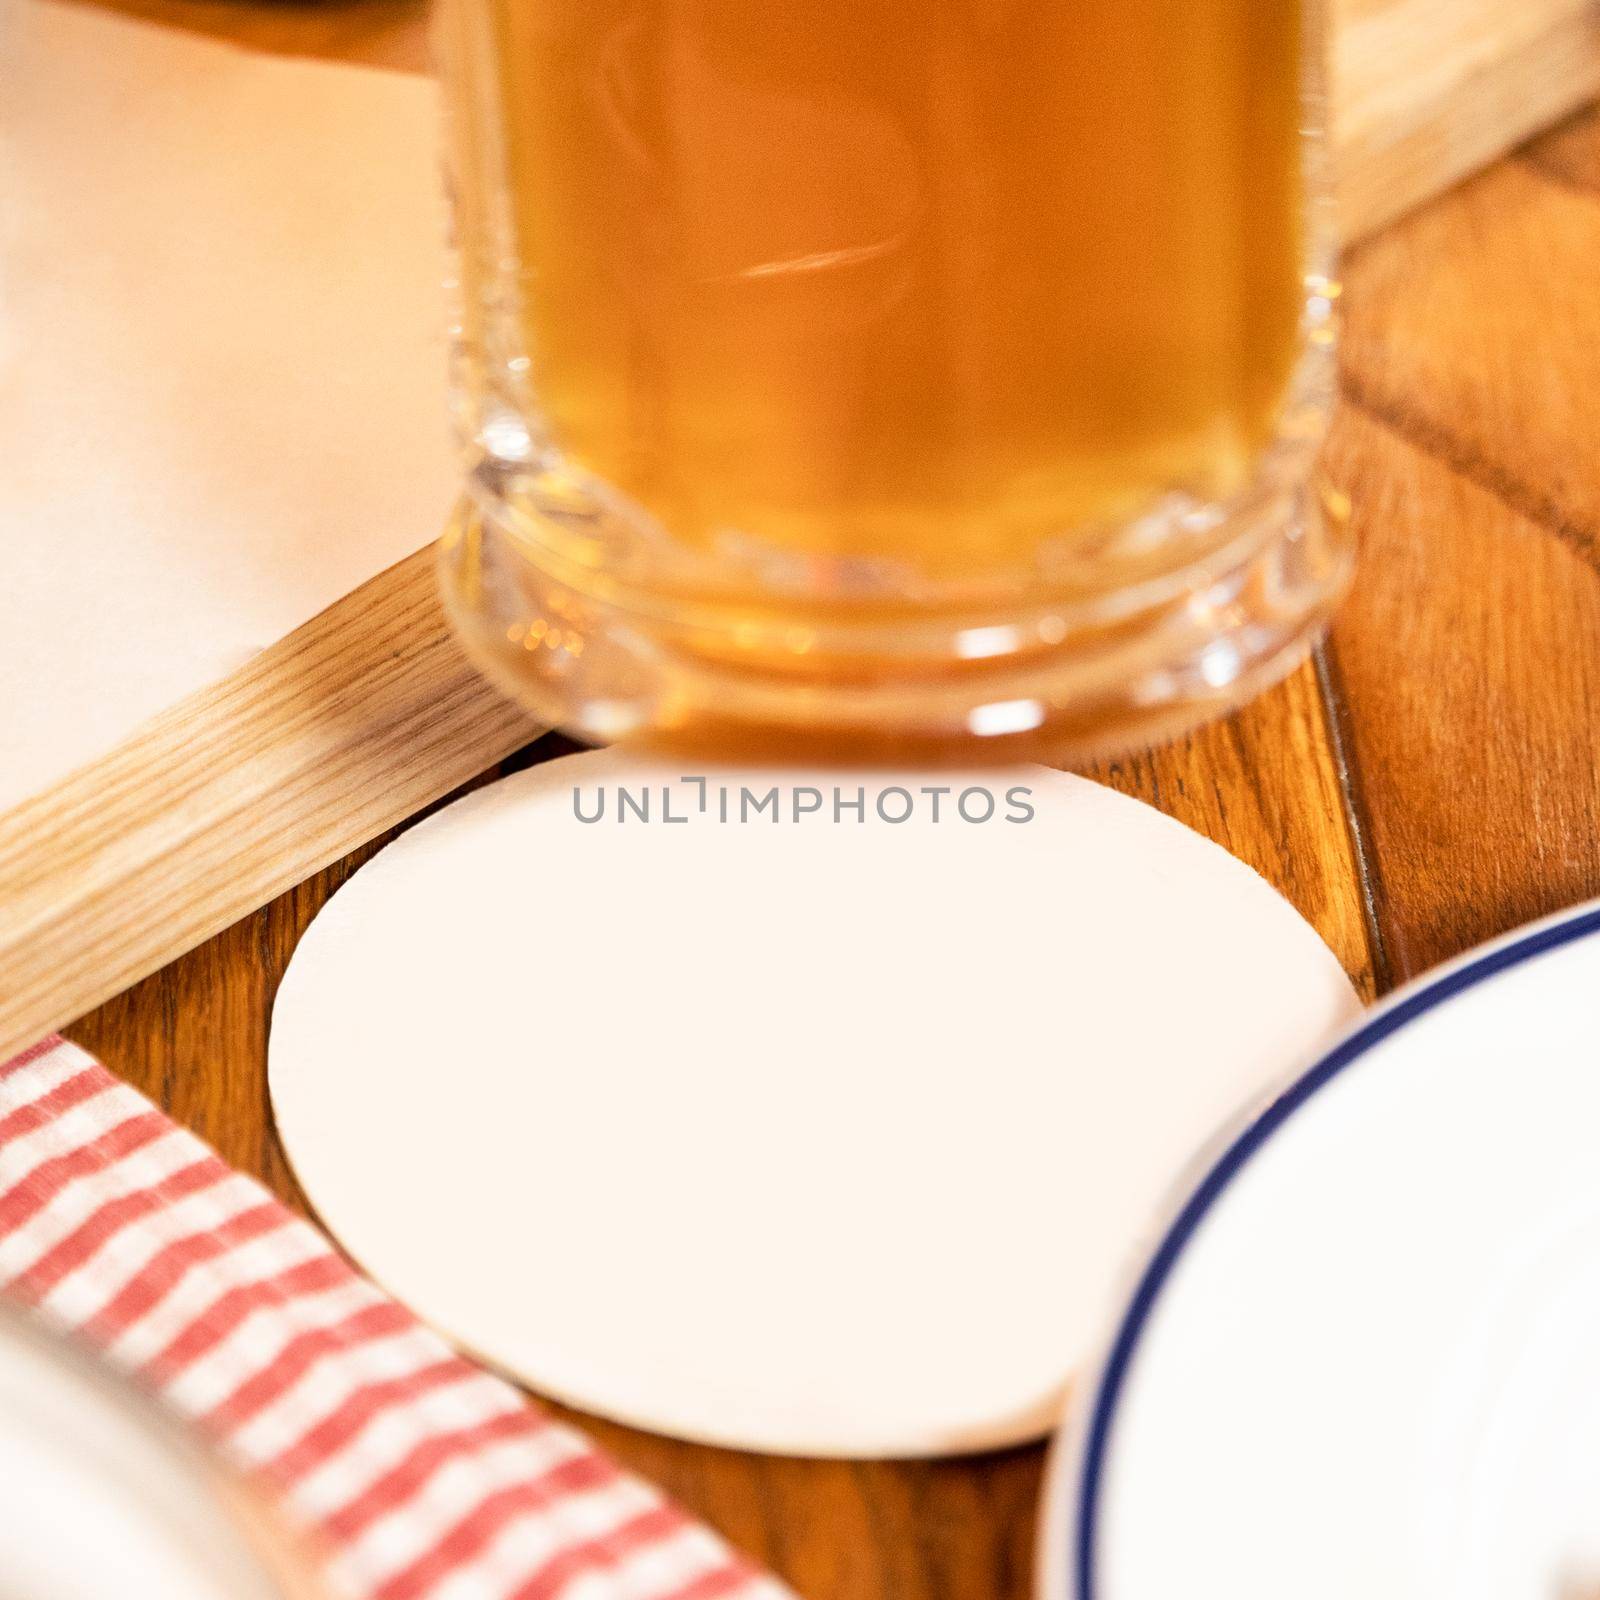 White place for logo, name bellow beer drink mug glass by ferhad